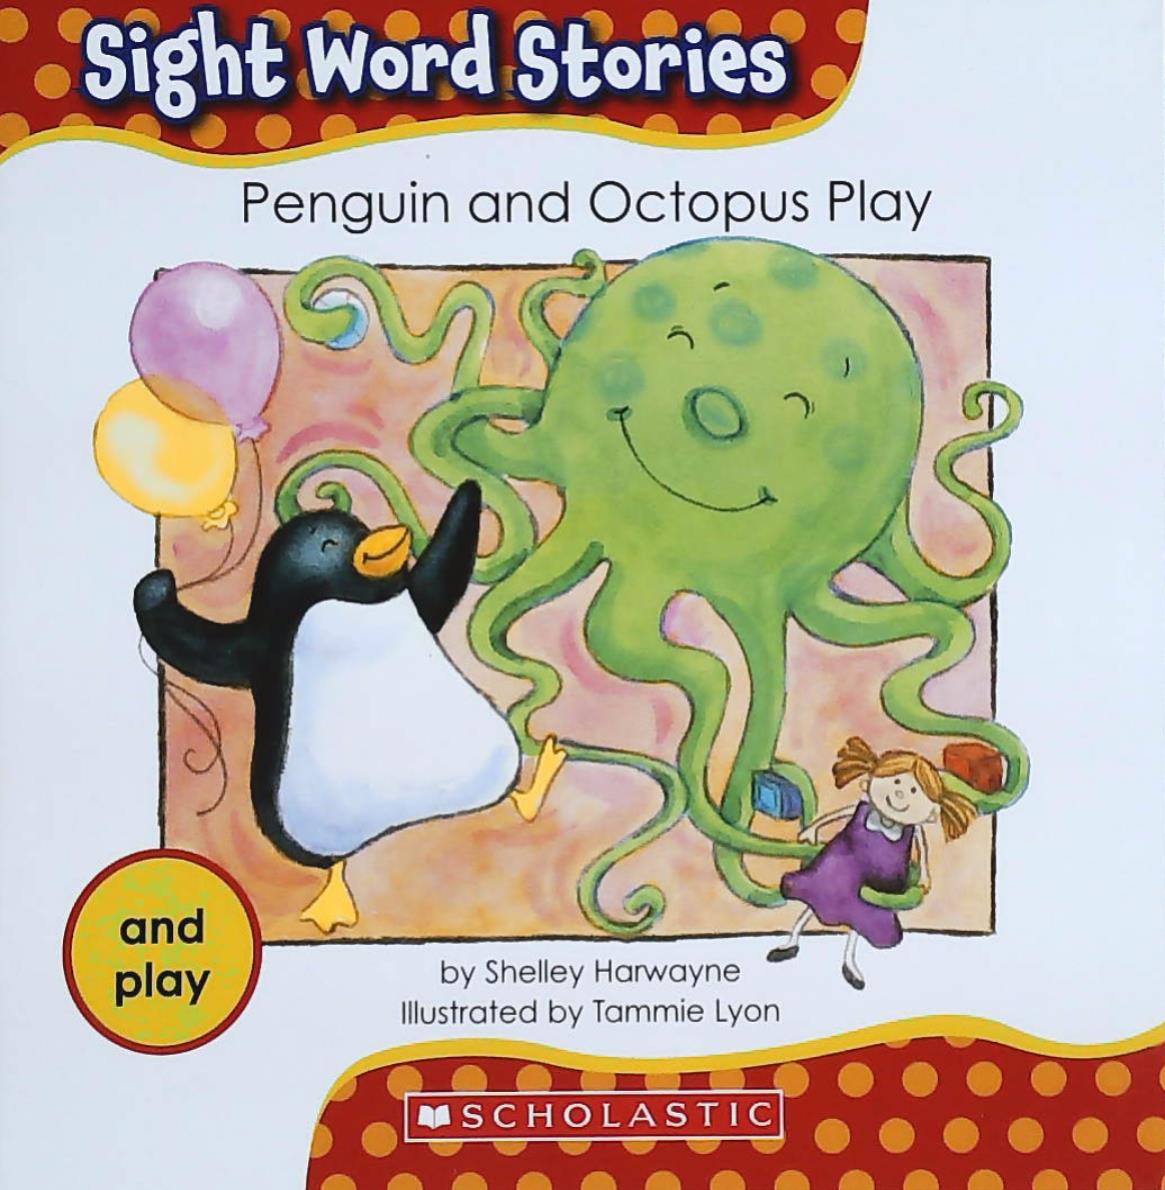 Livre ISBN 0545167876 Sight Word Stories : Penguin and Octopus Play (Shelley Harwayne)